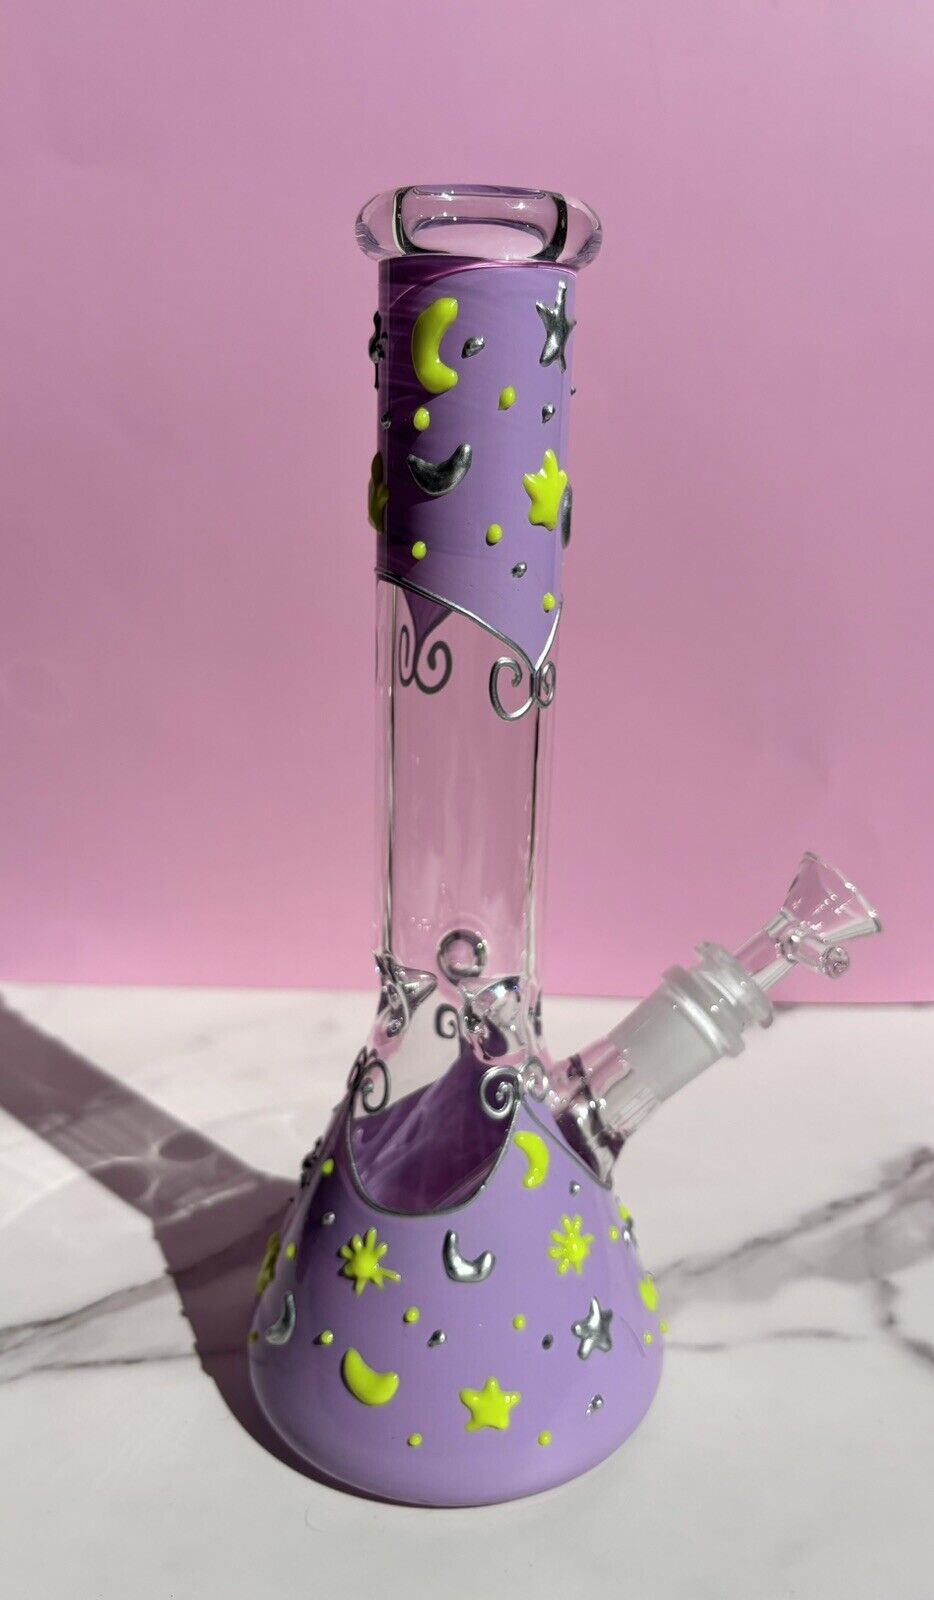 10” Glow In The Dark Bong, Hand painted Bongs, Water Pipe Tobacco Pipes